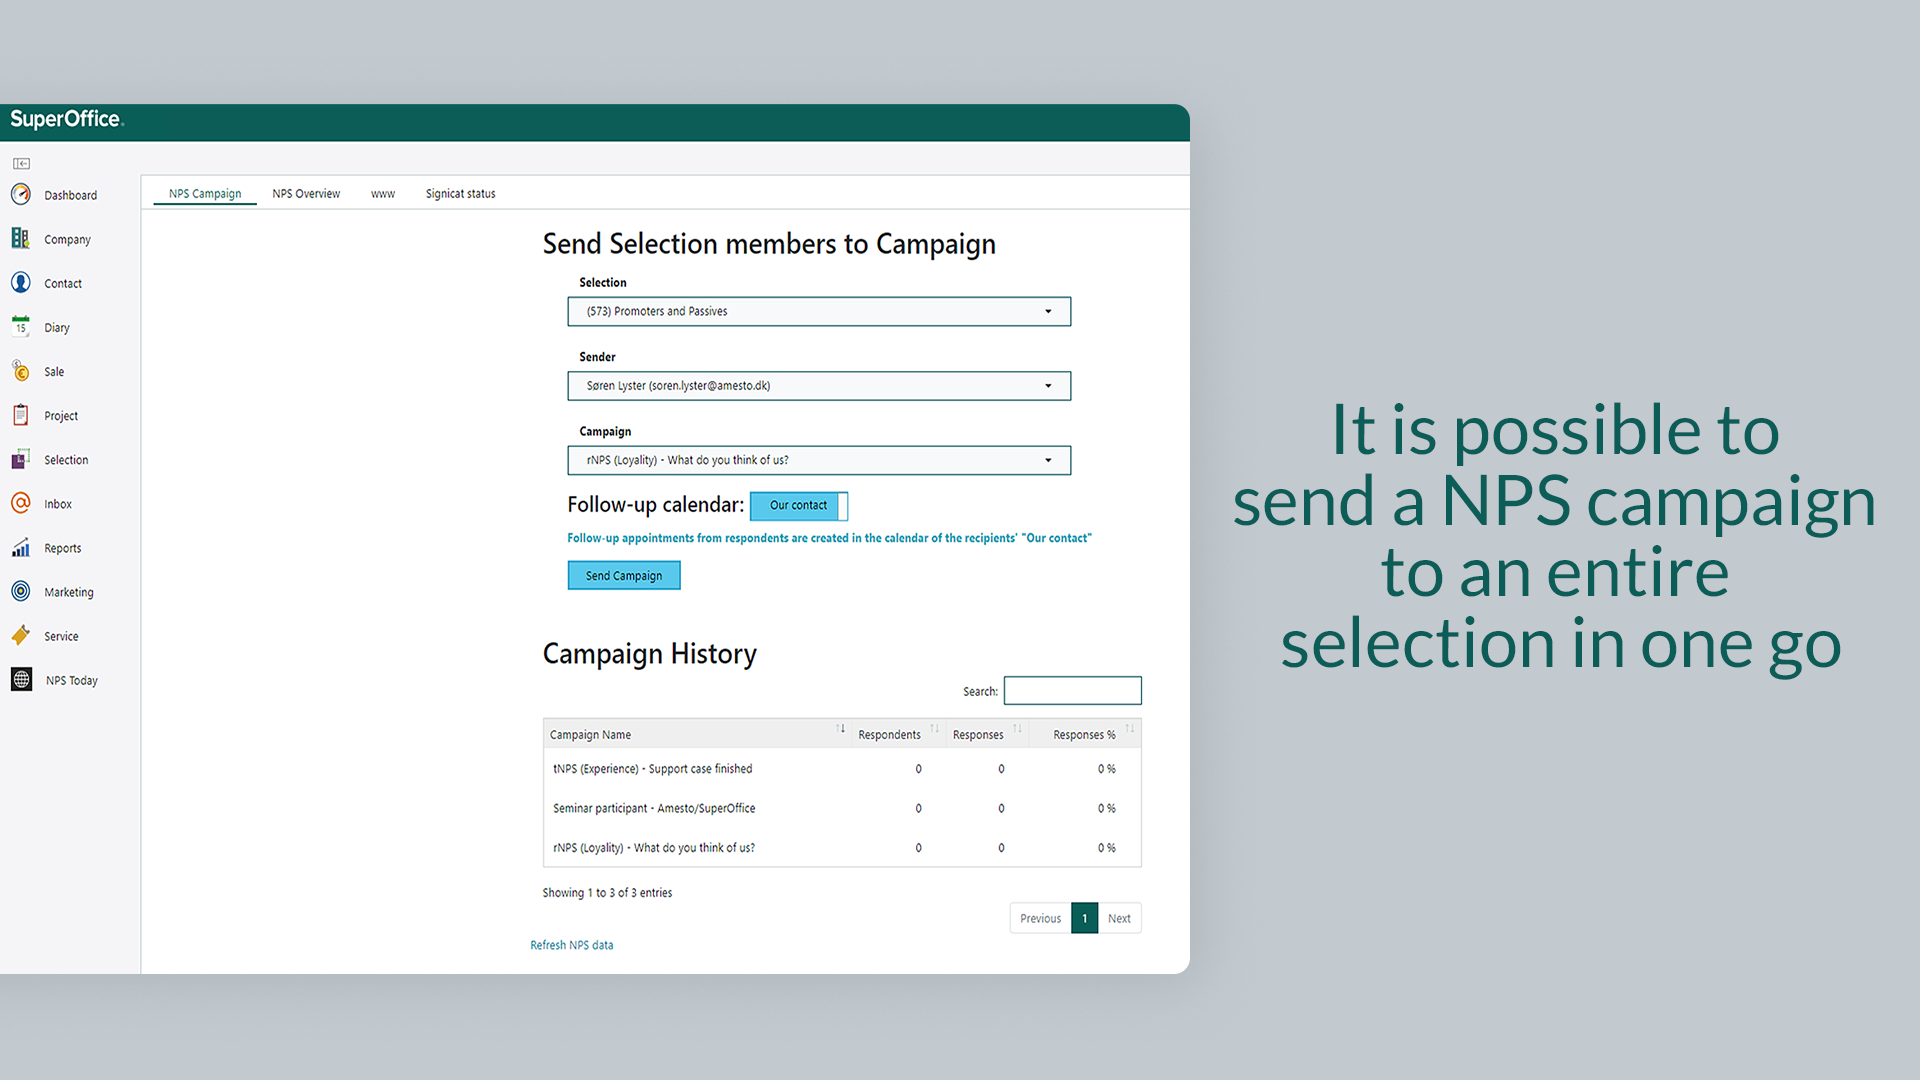 6.It is possible to send a NPS campaign to an entire selection in one go.png